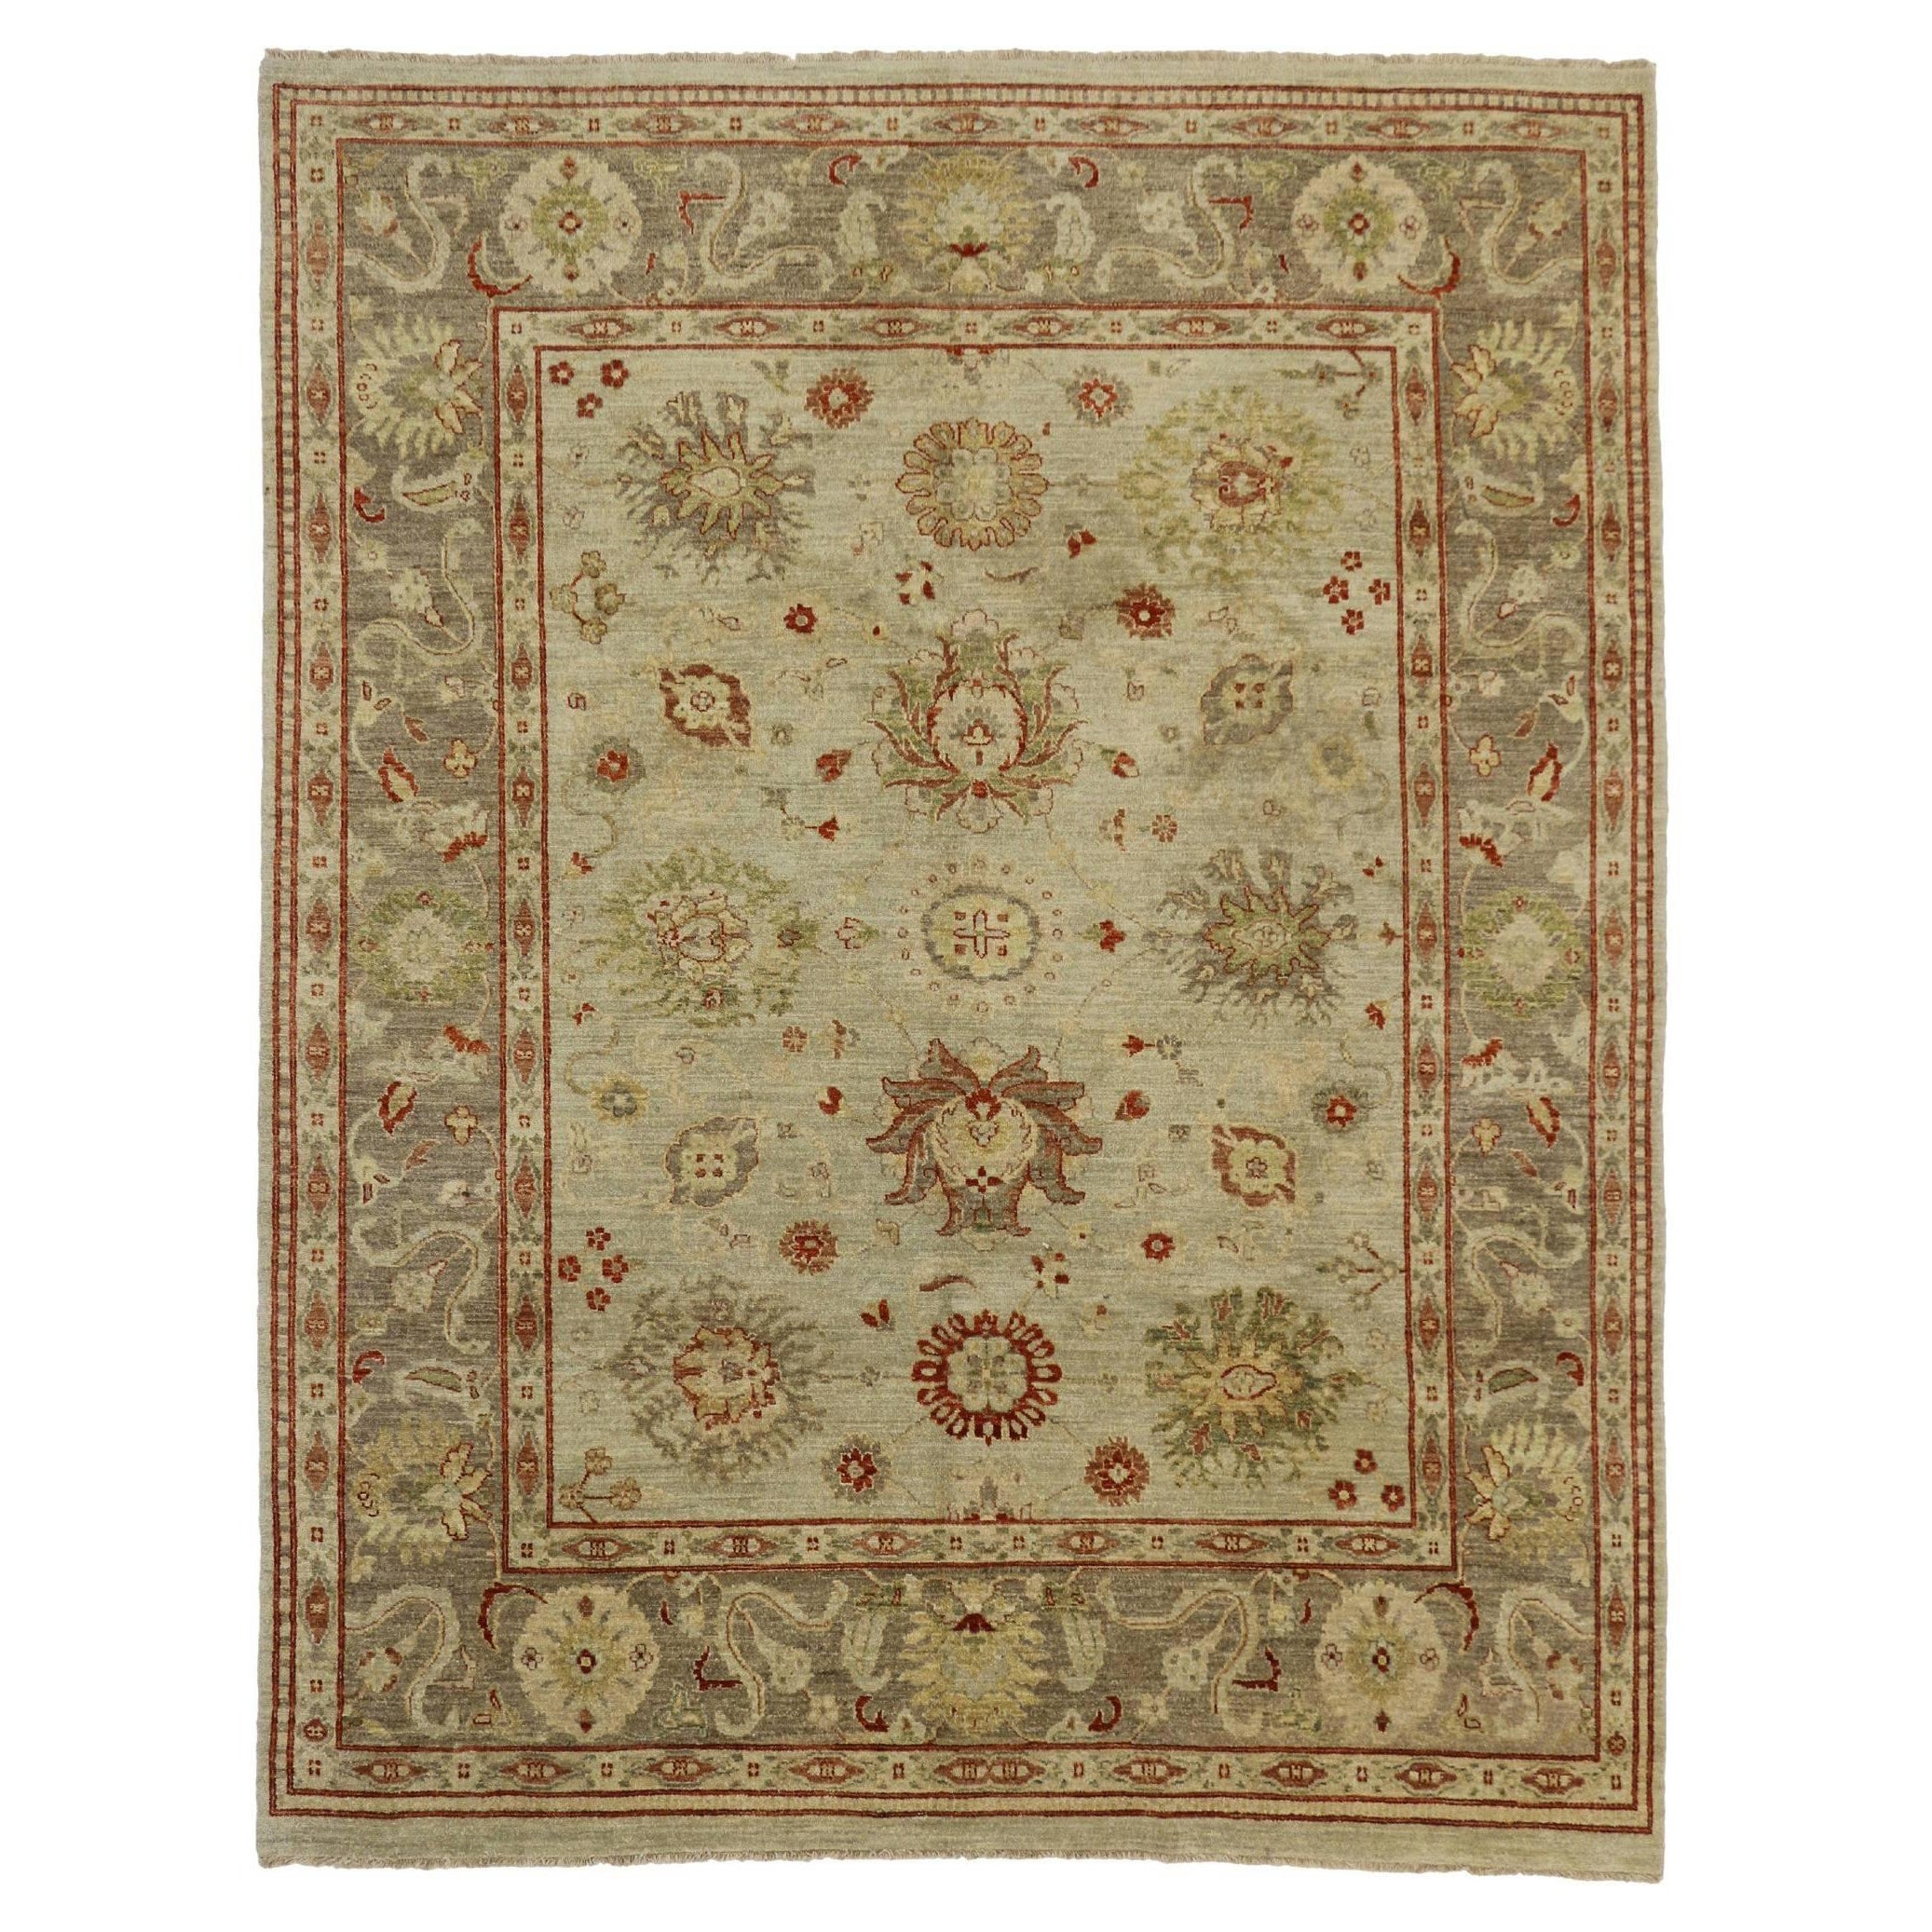 New Contemporary Pakistani Oushak Rug with Modern Rustic Style